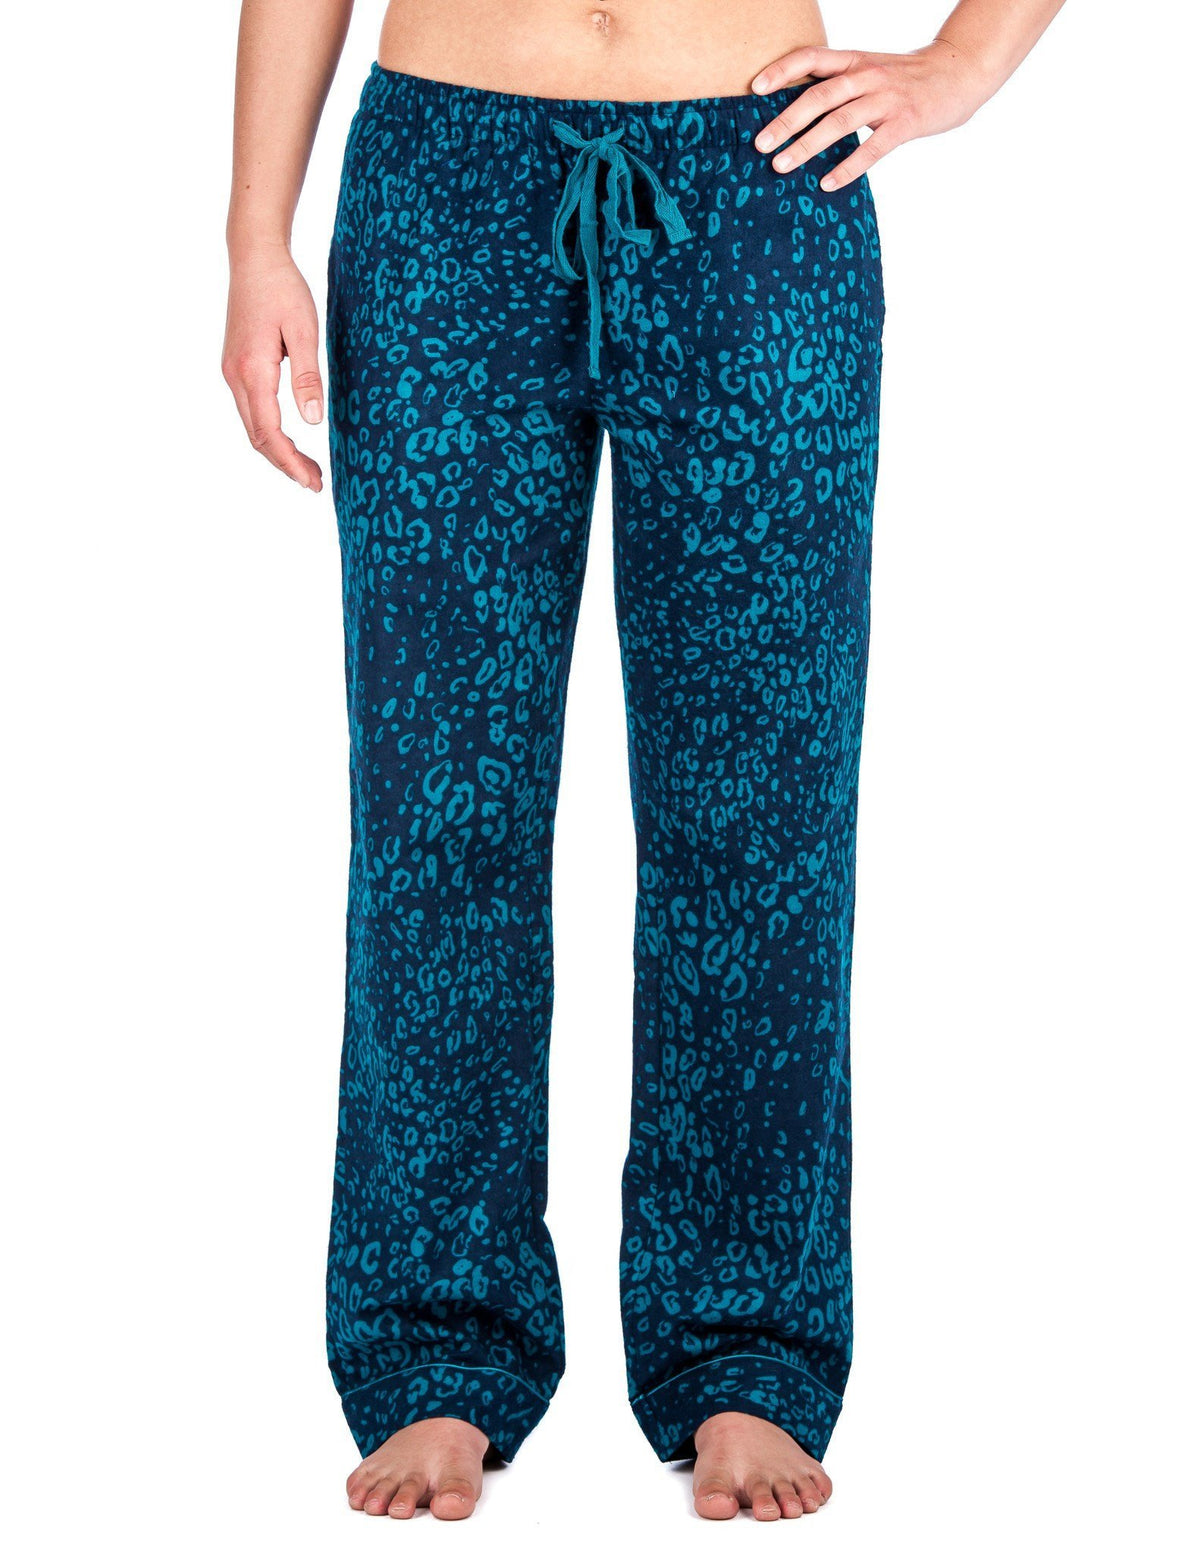 Relaxed Fit Womens 100% Cotton Flannel Lounge Pants - Leopard Blue